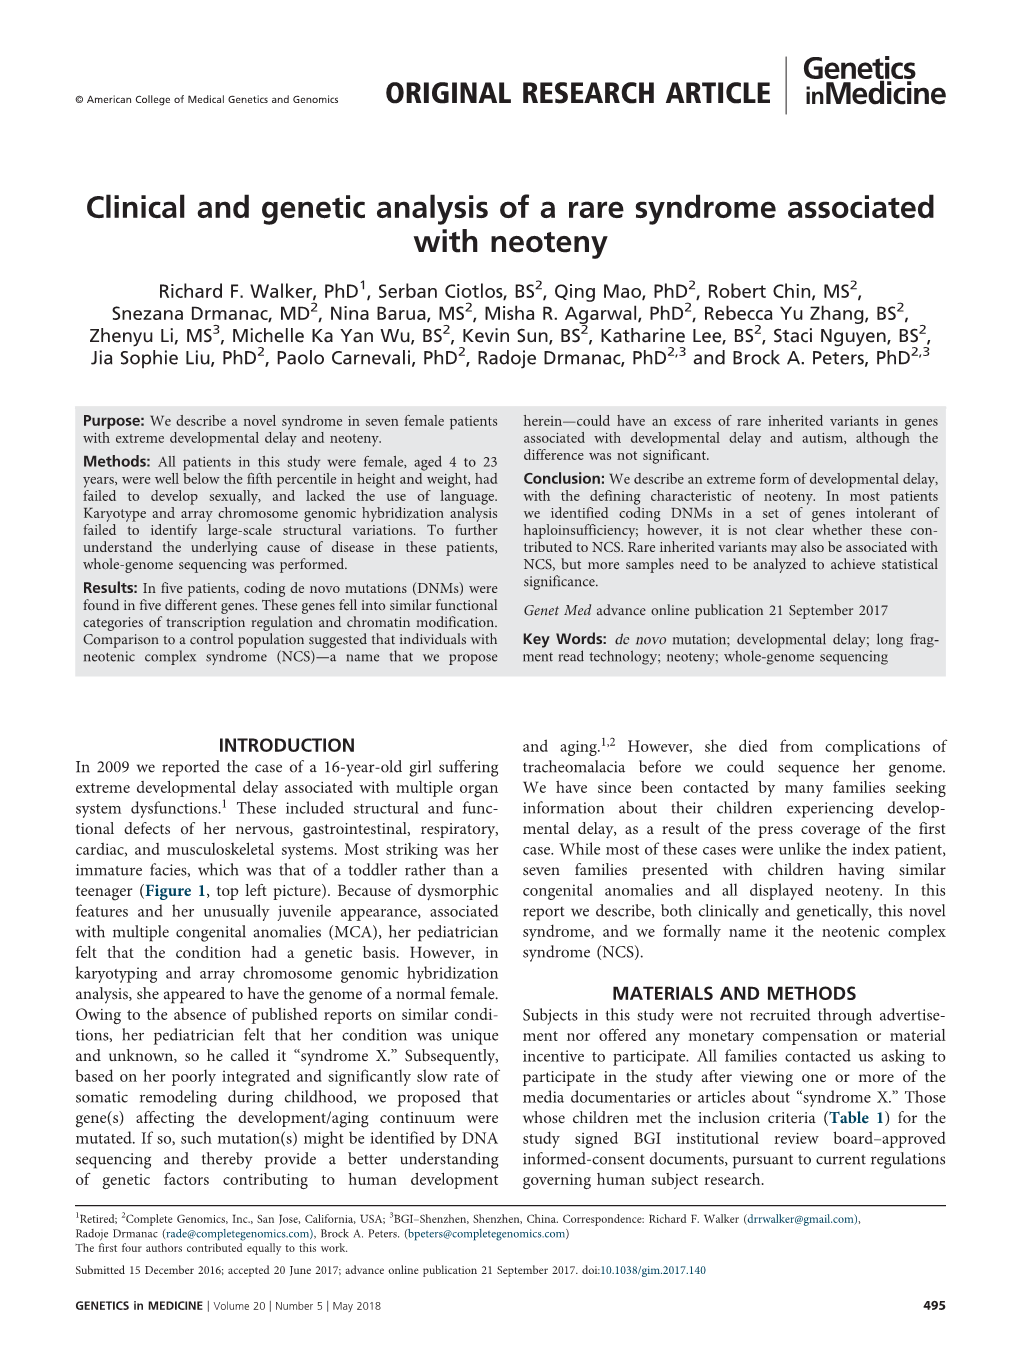 Clinical and Genetic Analysis of a Rare Syndrome Associated with Neoteny